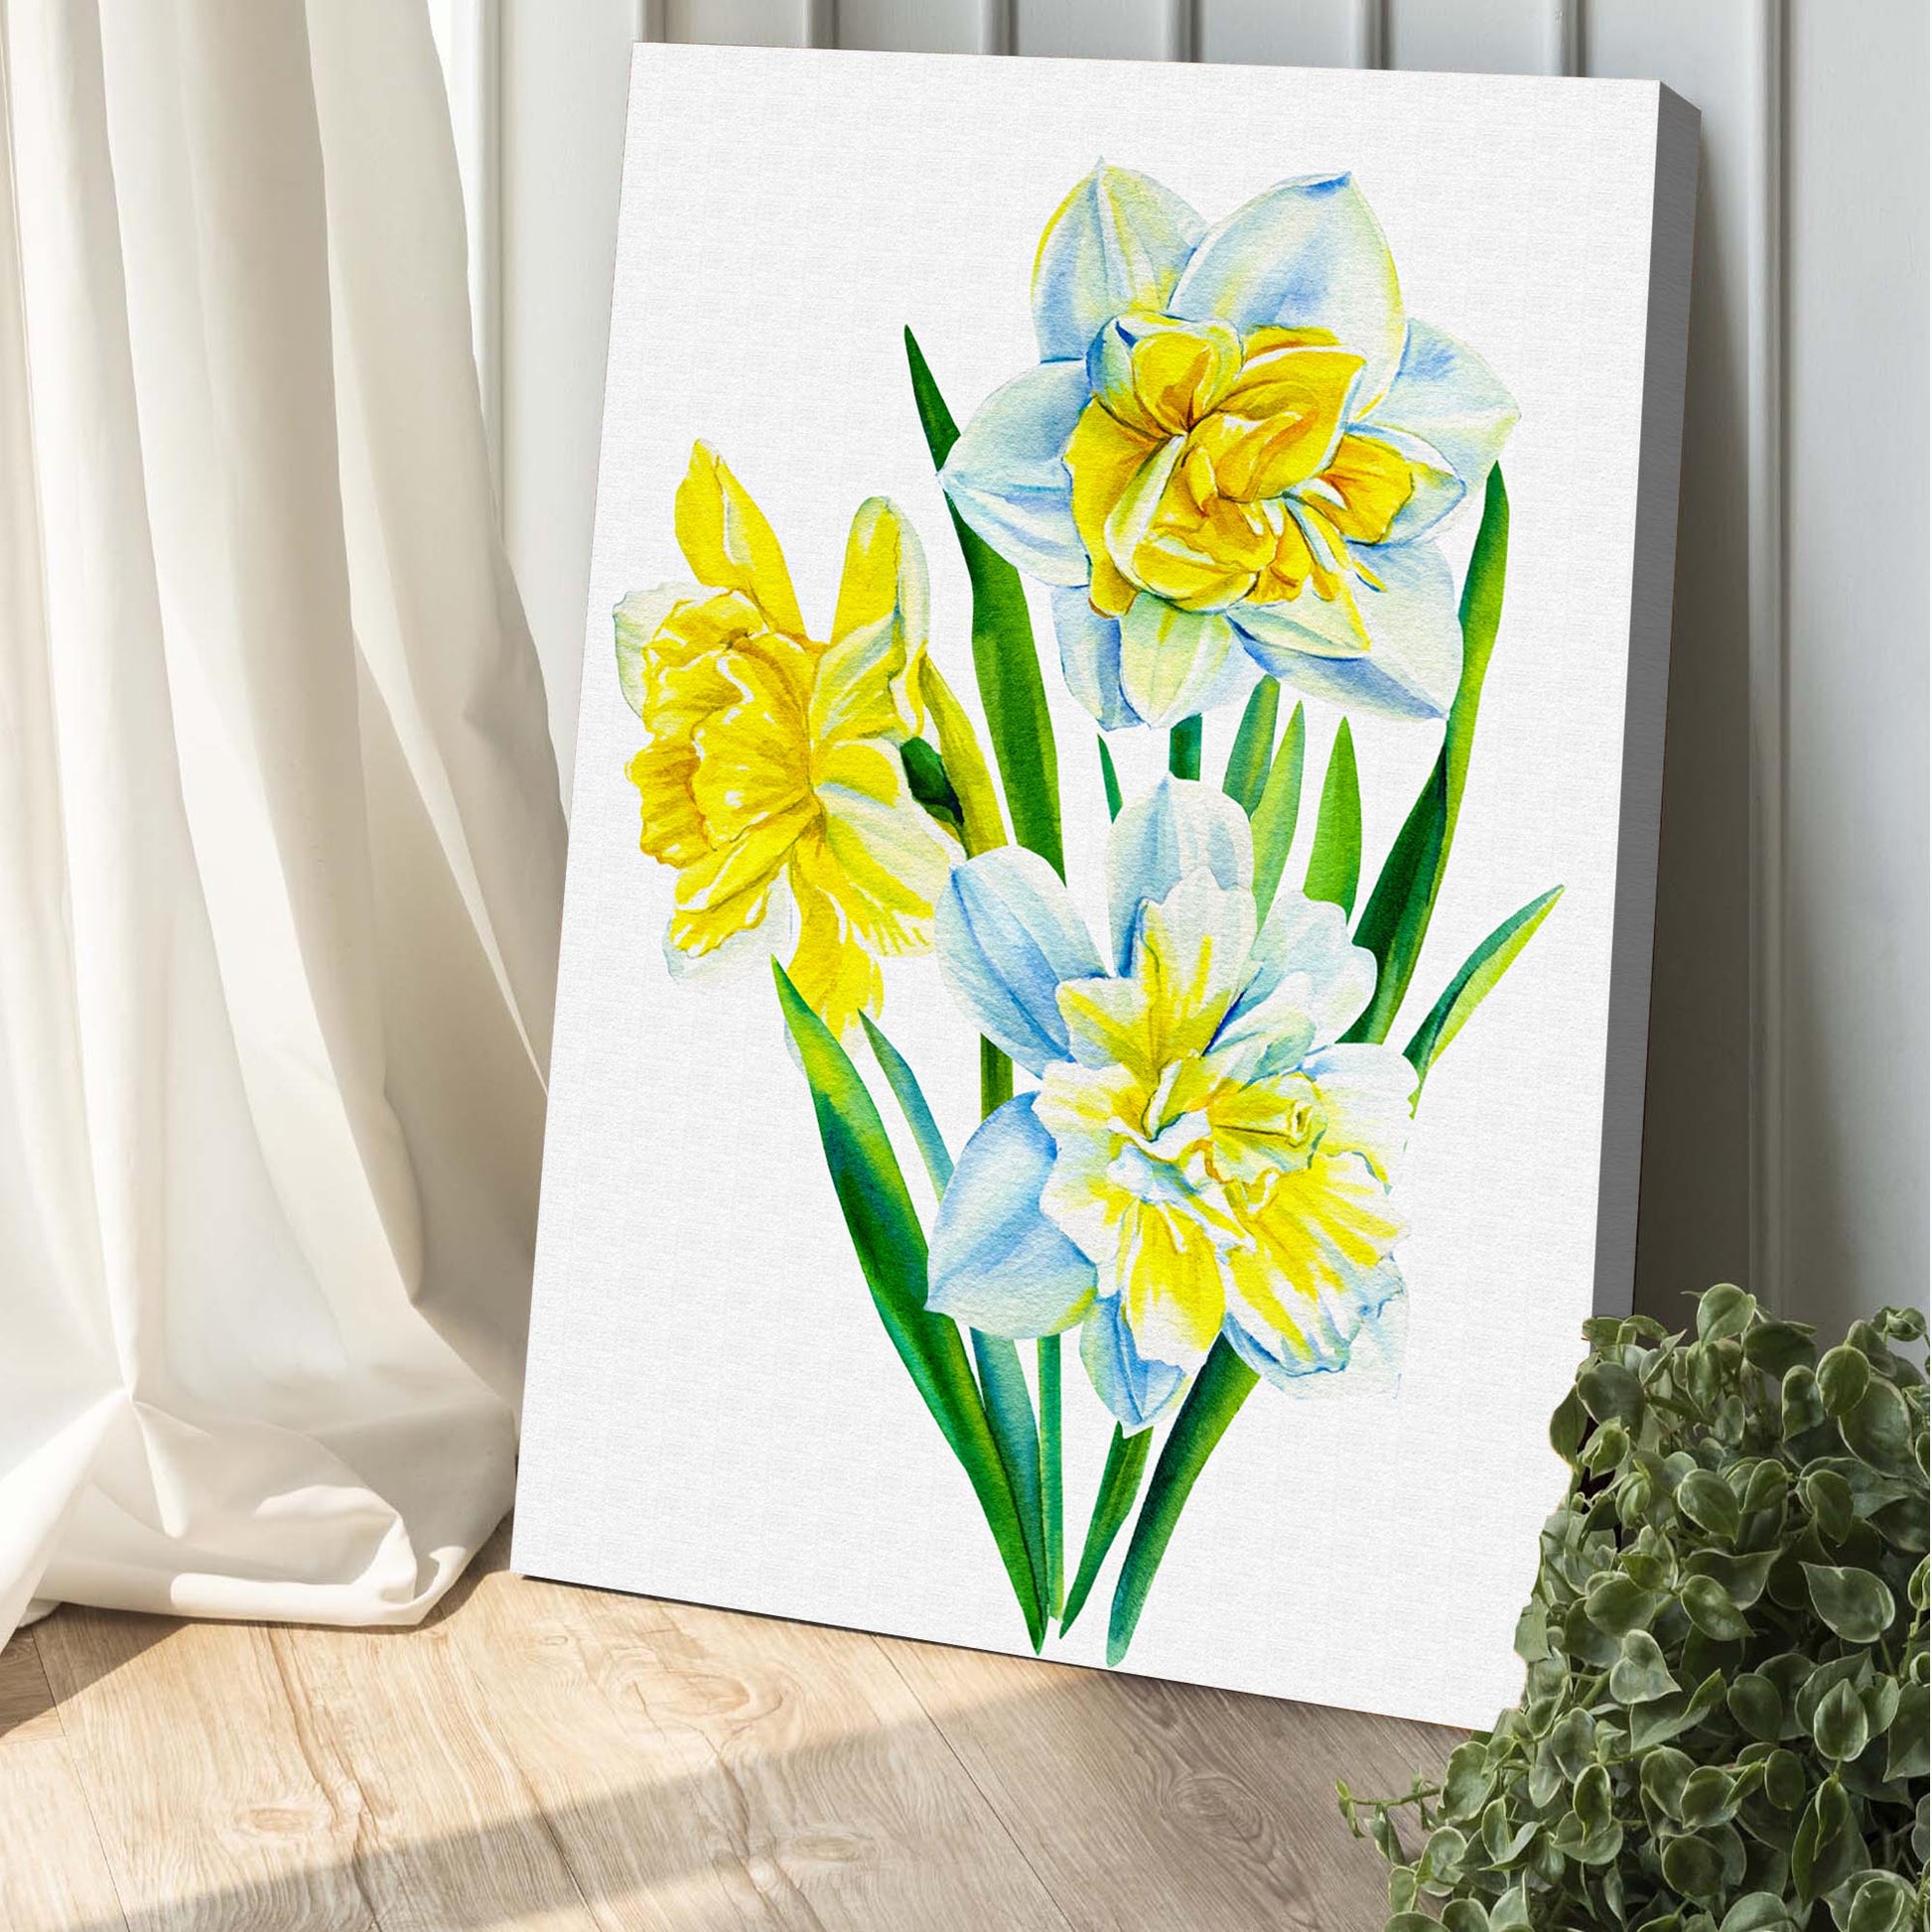 Flowers Daffodils Watercolor Canvas Wall Art Style 2 - Image by Tailored Canvases